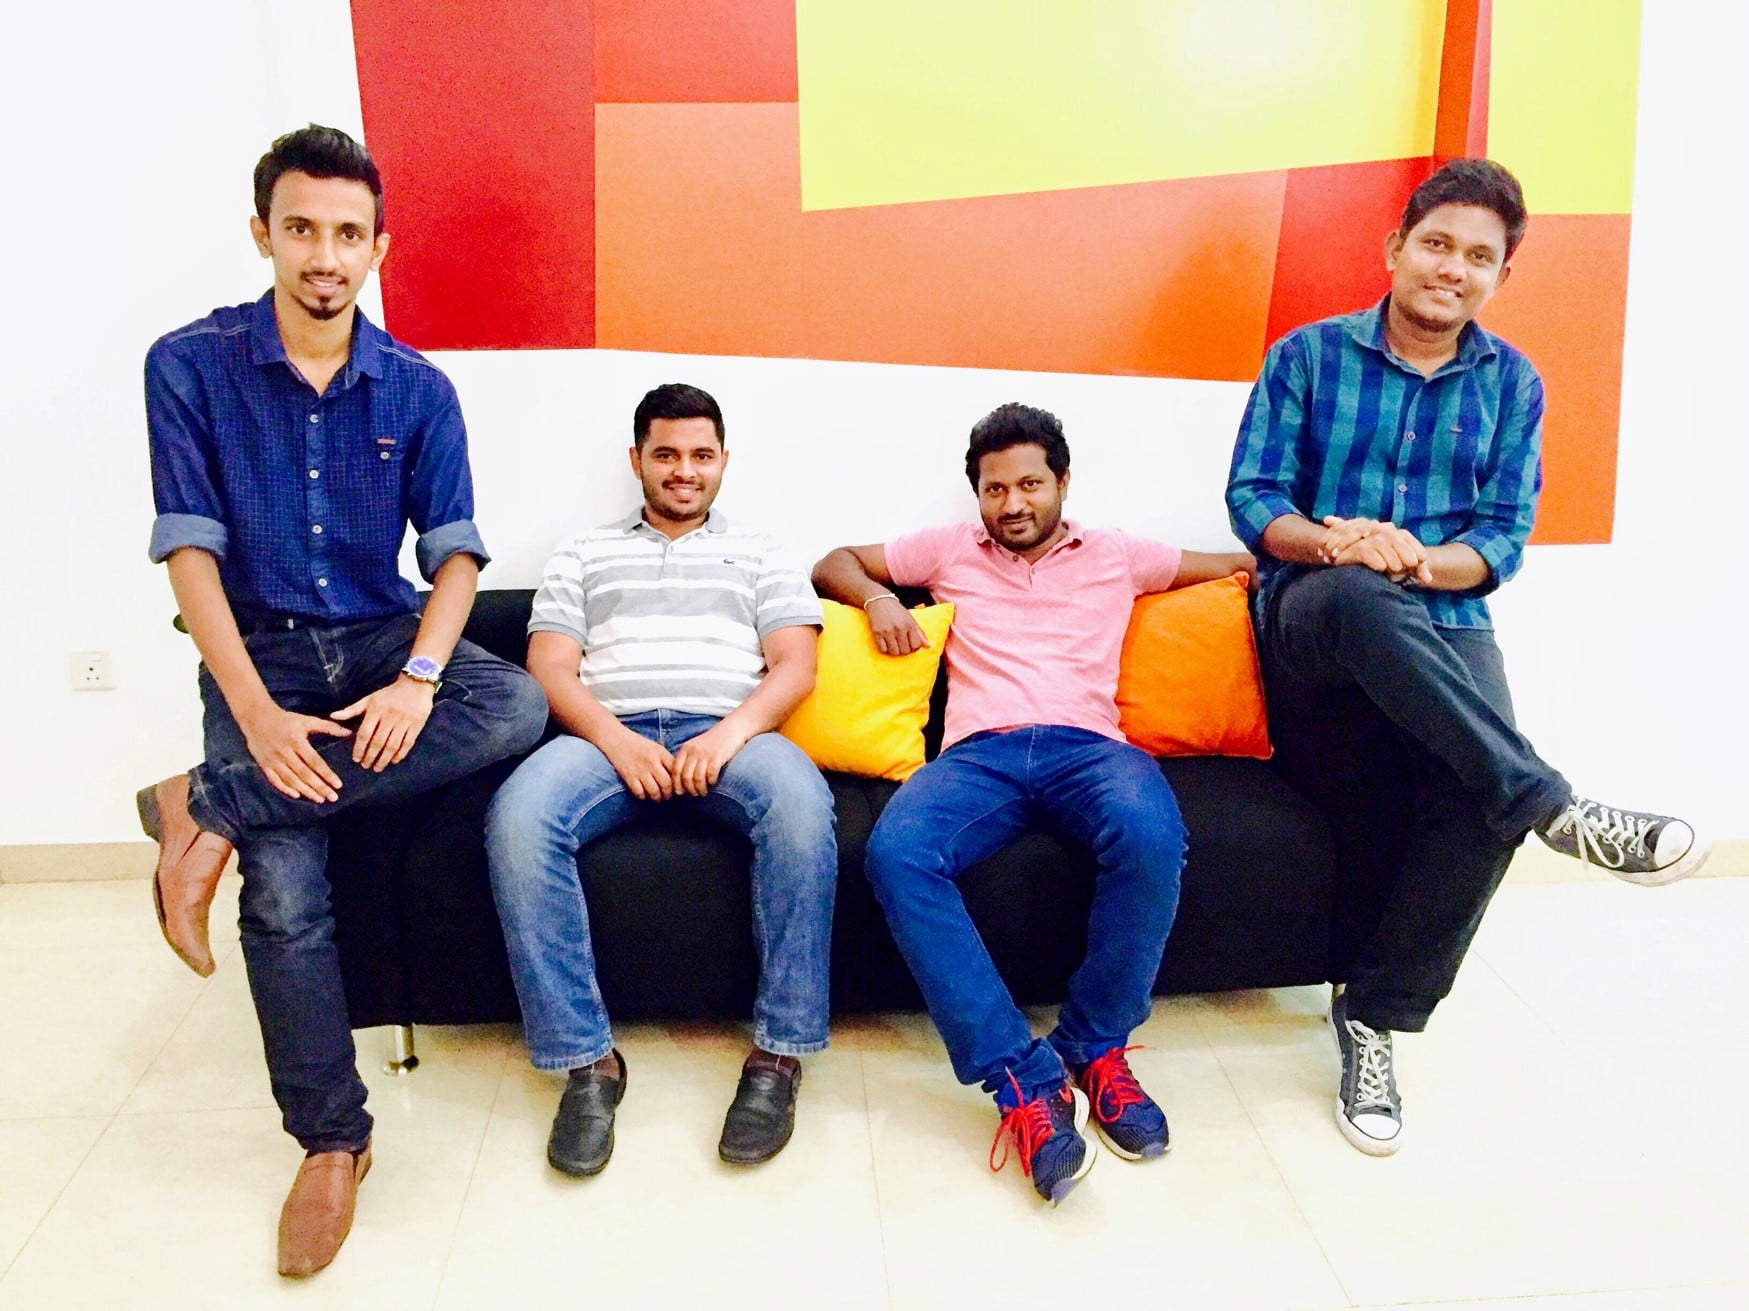 Typefi's Sri Lankan support team in the Colombo office—Supun, Dinitha, Dilum, and Udara.